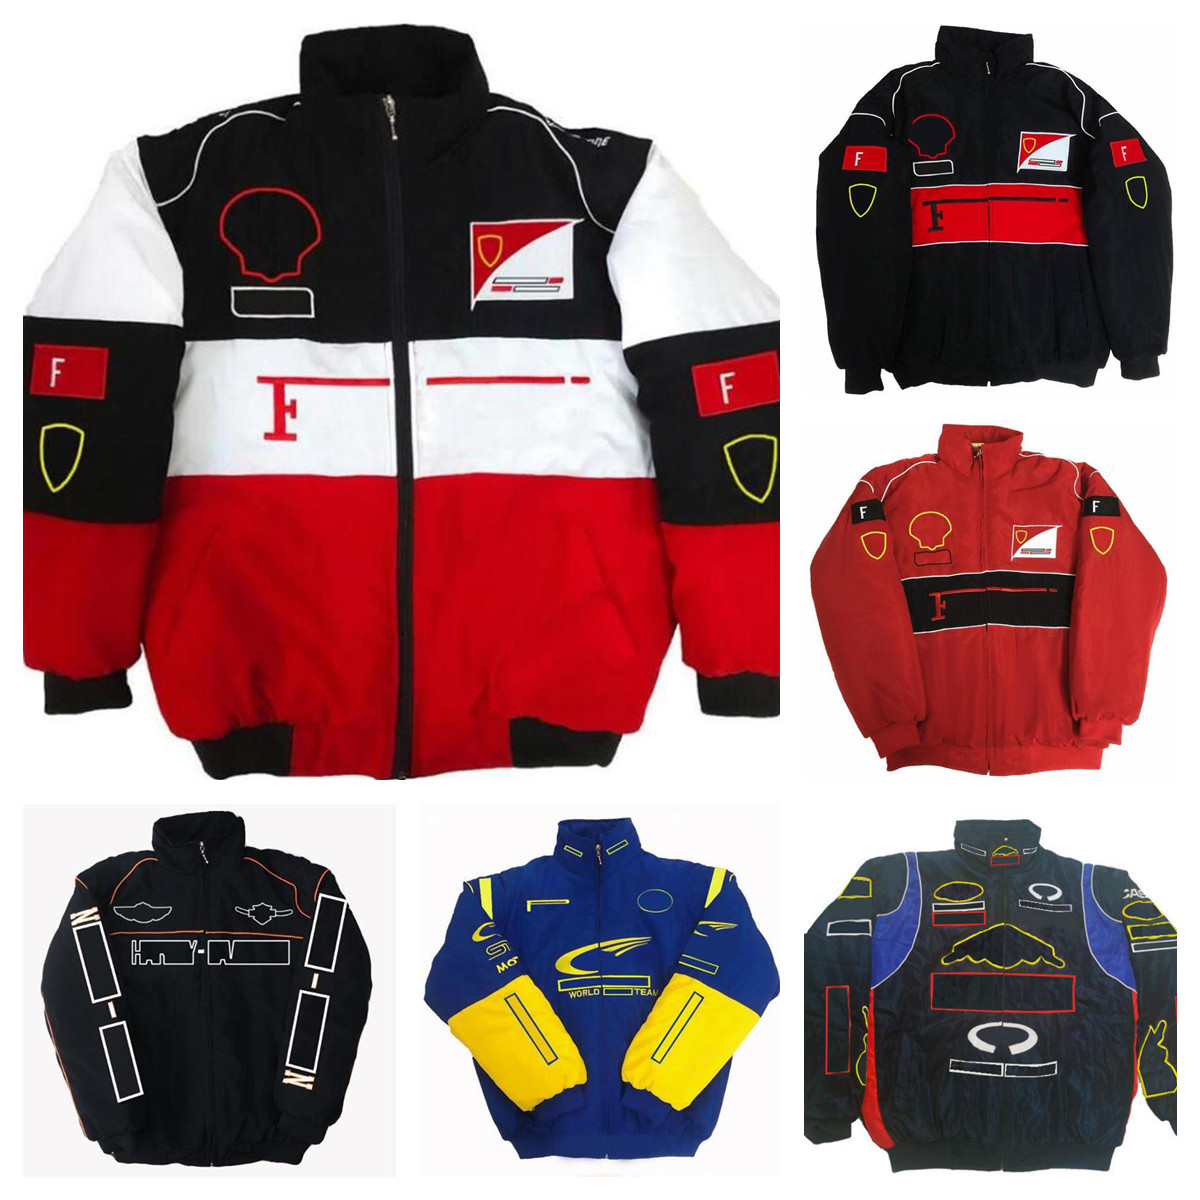 F1 Formula 1 racing jacket winter car full embroidered logo cotton clothing spot sale